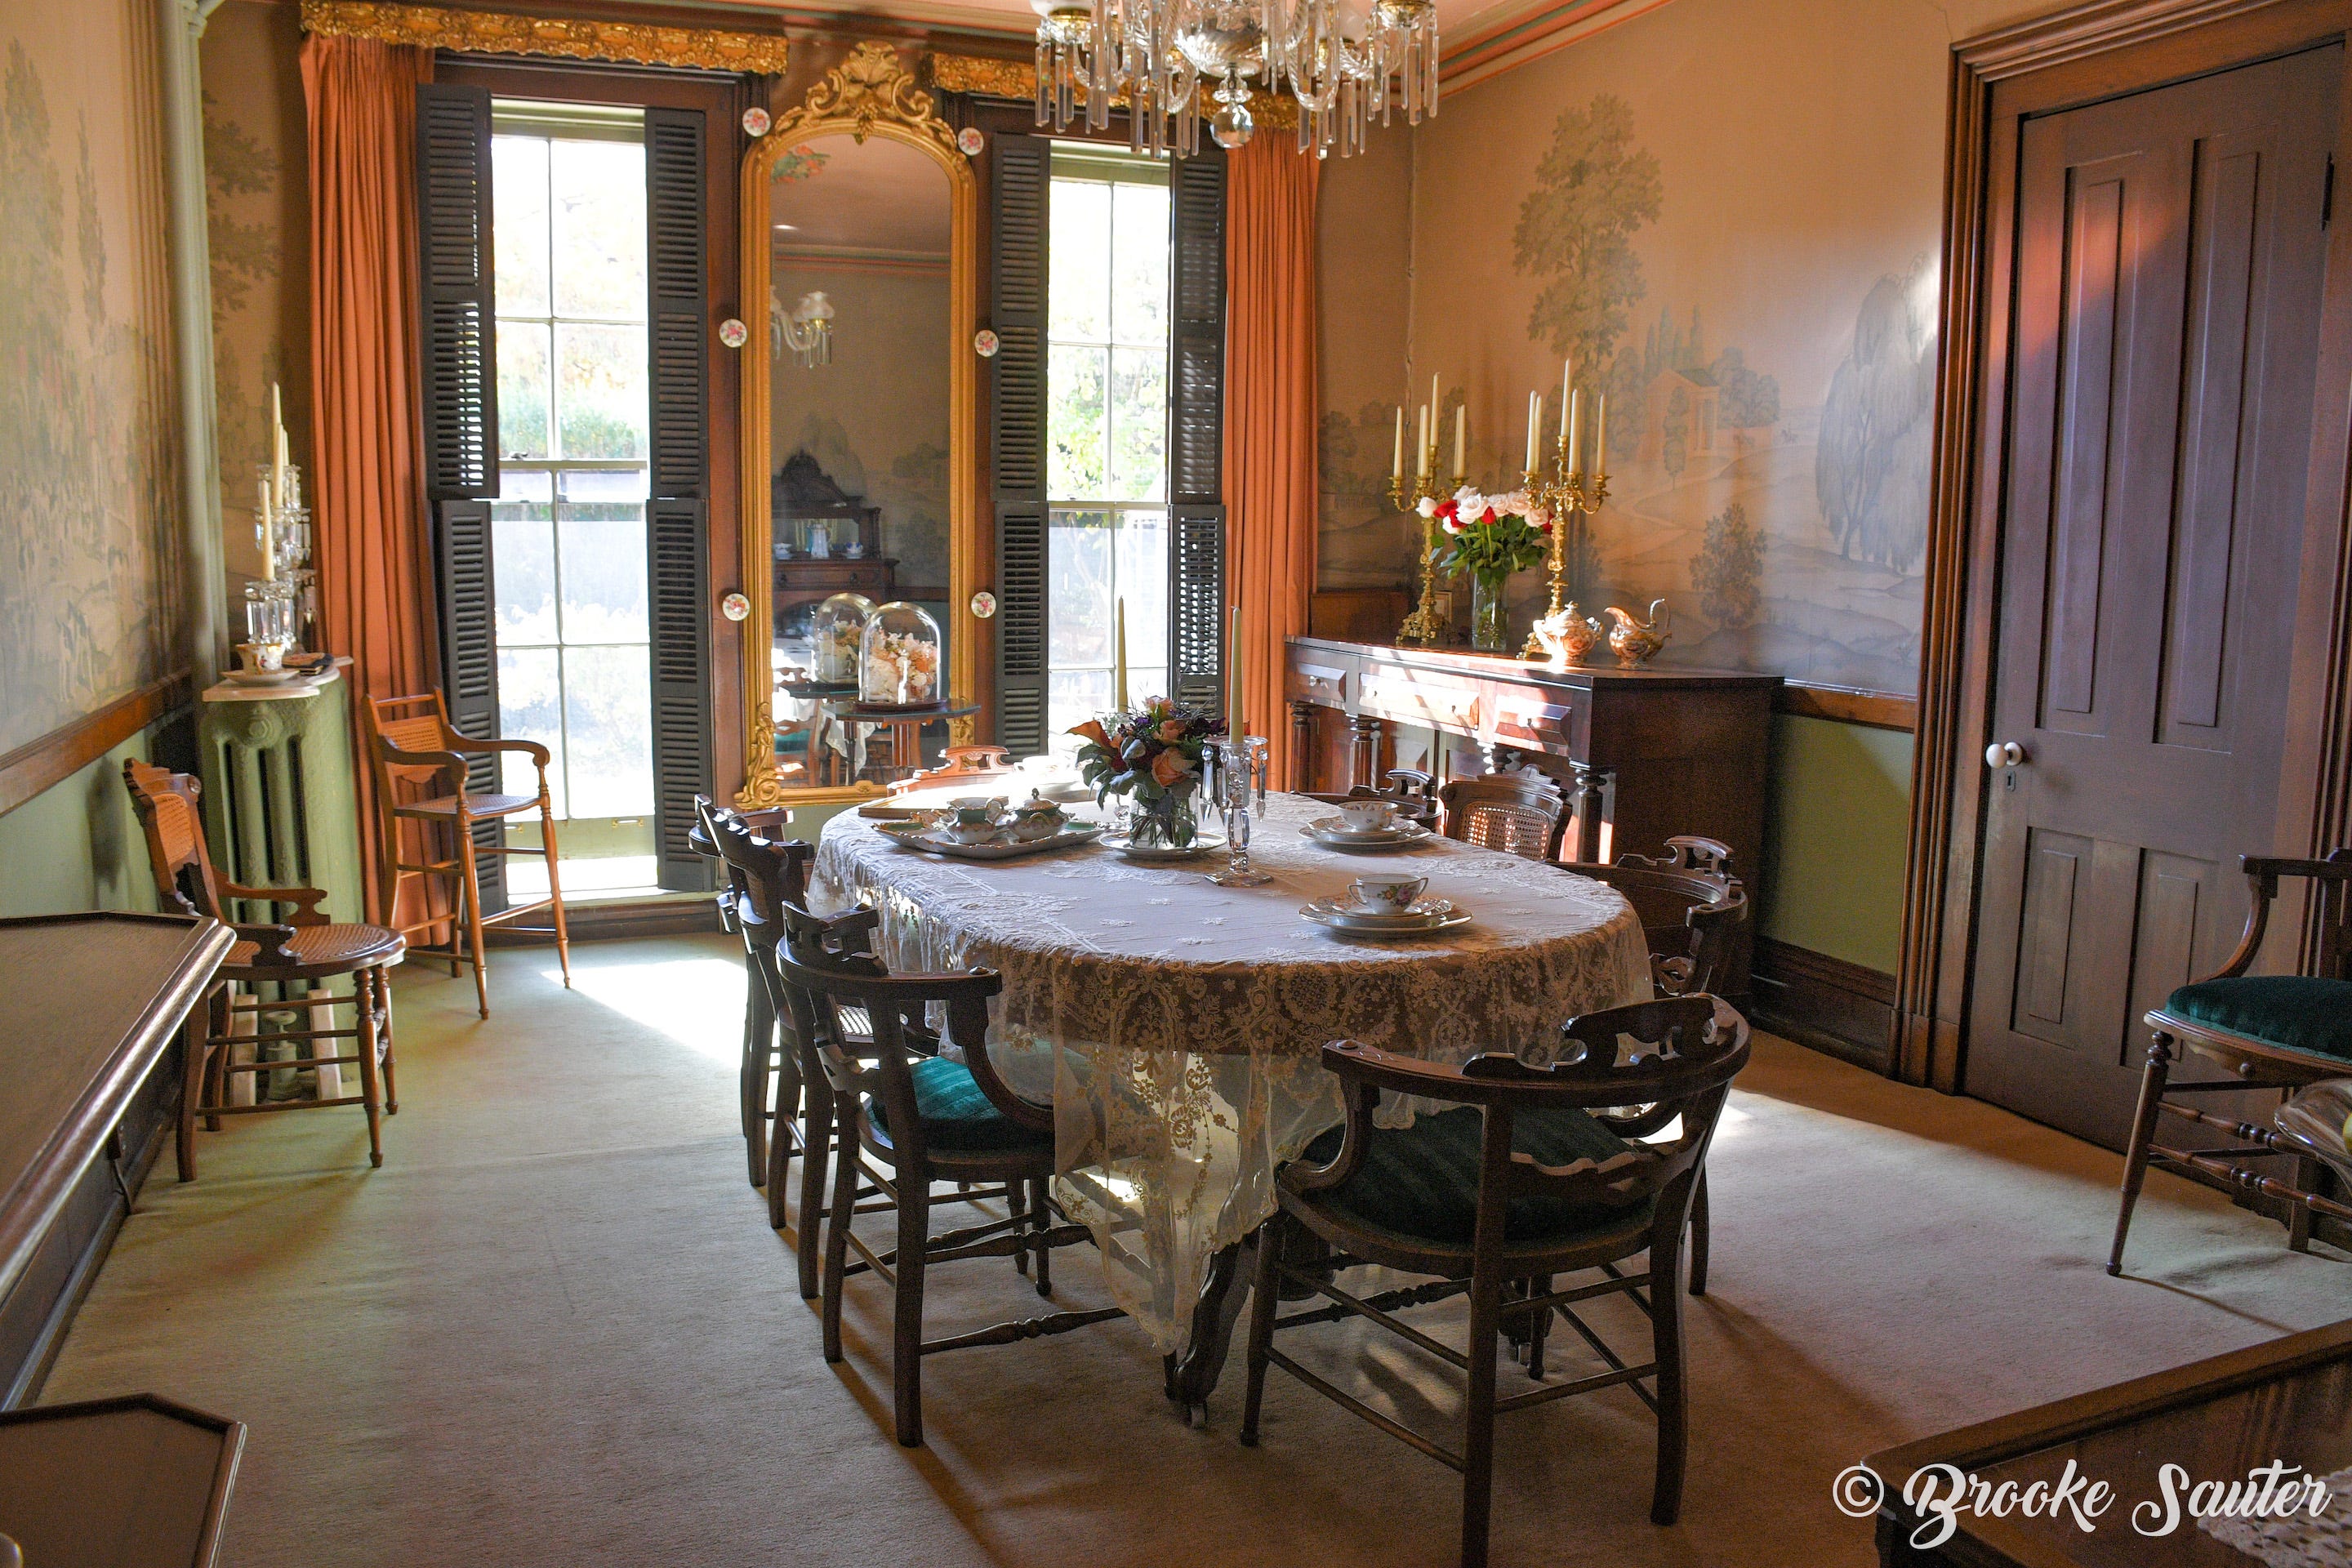 A look inside the historic Ball home on Ninth Street Hill